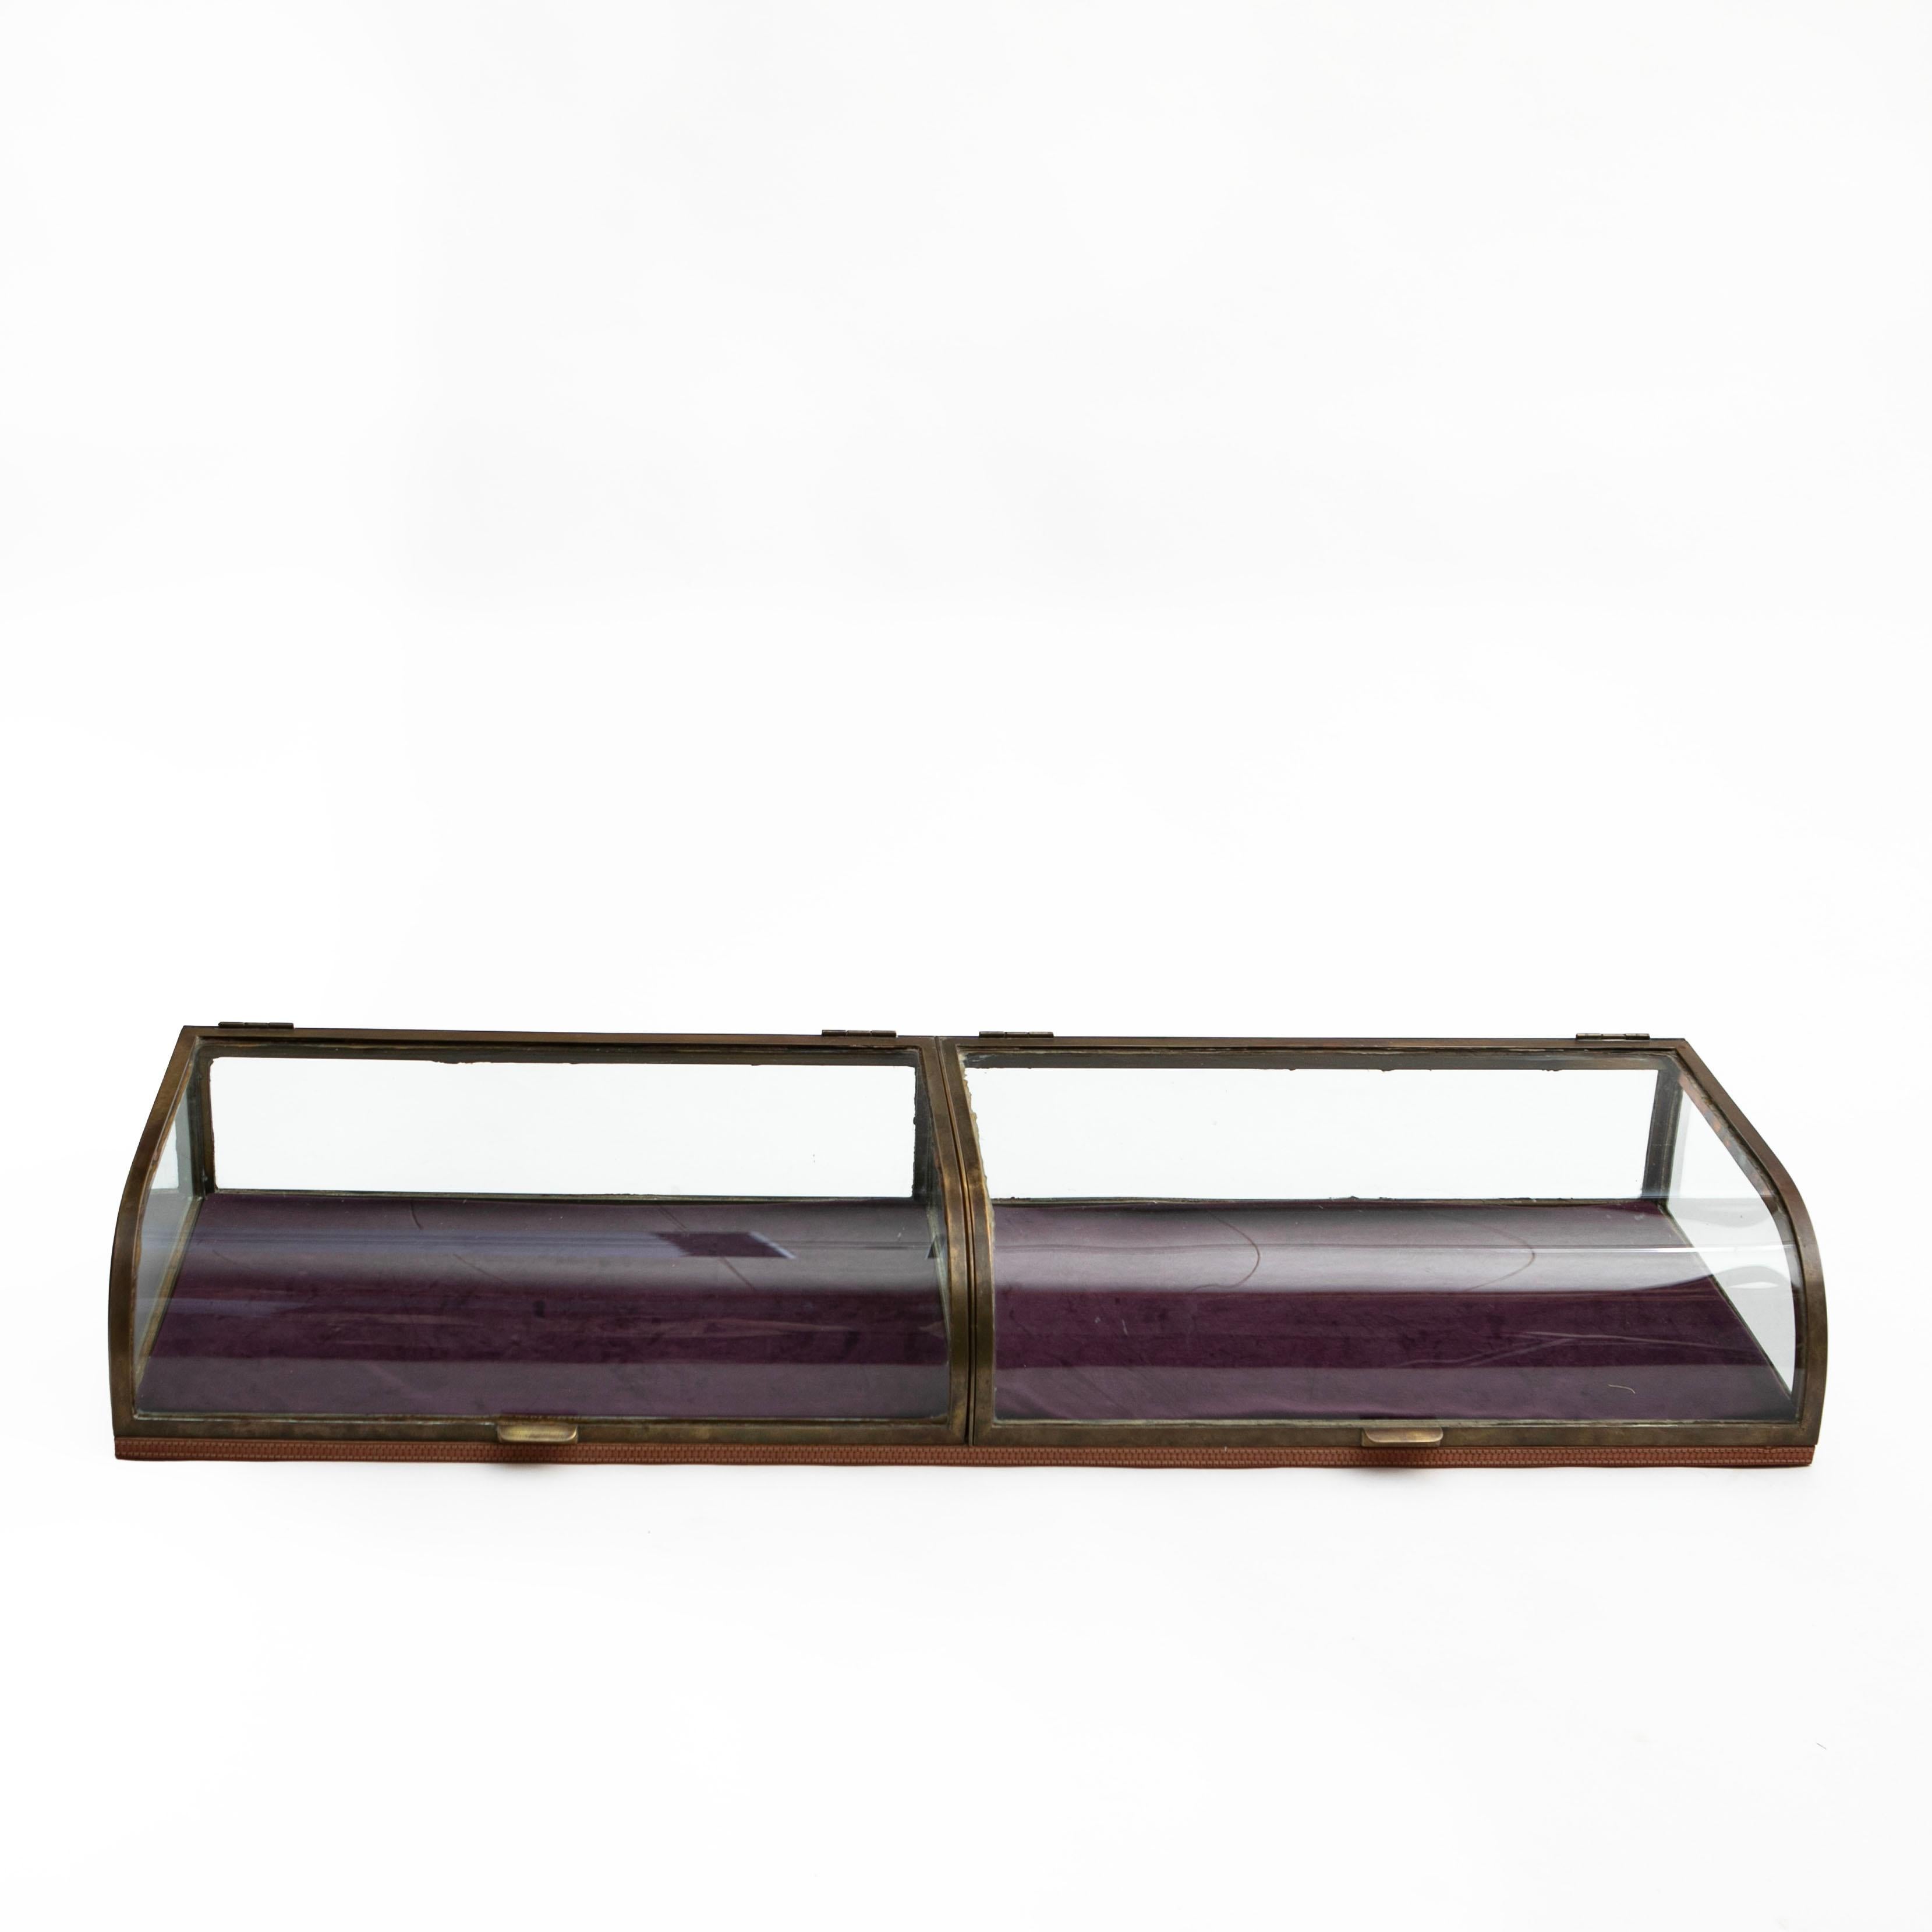 French antique curved glass countertop showcase made of glass and quality brass.
Brass frame with two classic curved glass door and glass sides. The bottom is covered with purple velour (this can be easily replaced).
In untouched good condition with